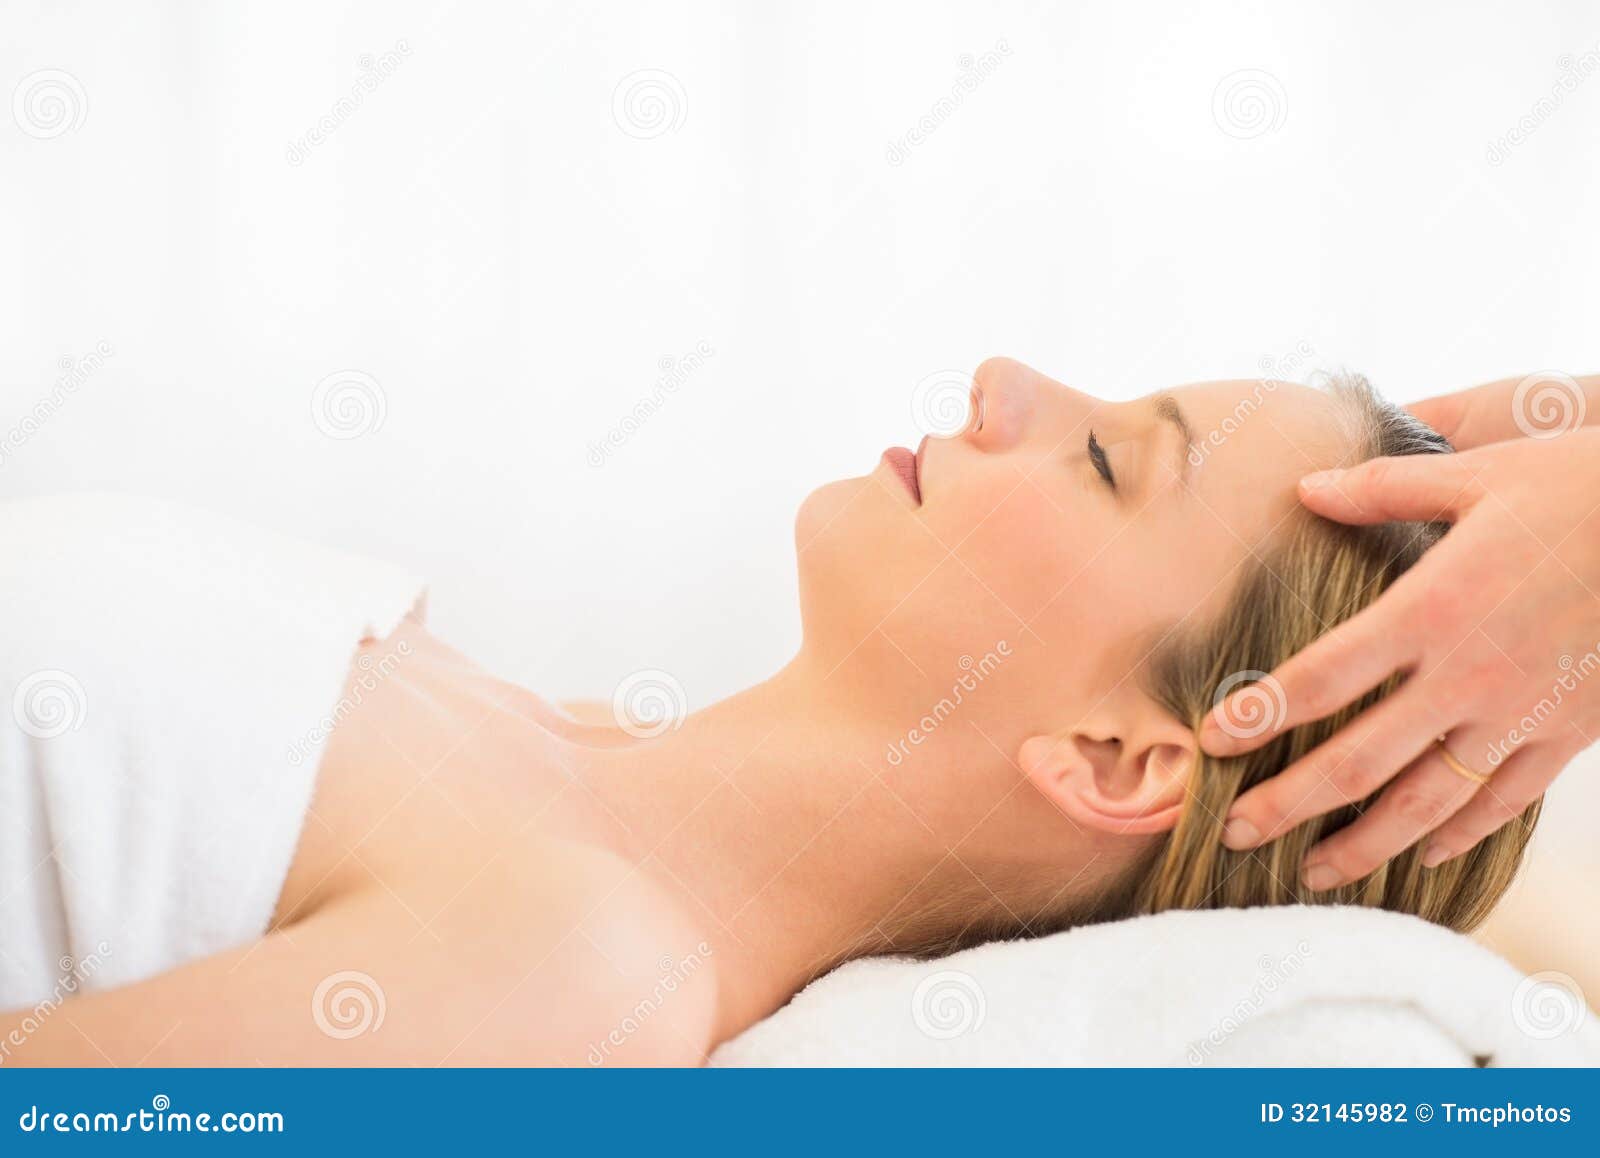 https://thumbs.dreamstime.com/z/woman-receiving-head-massage-health-spa-side-view-close-up-beautiful-young-32145982.jpg